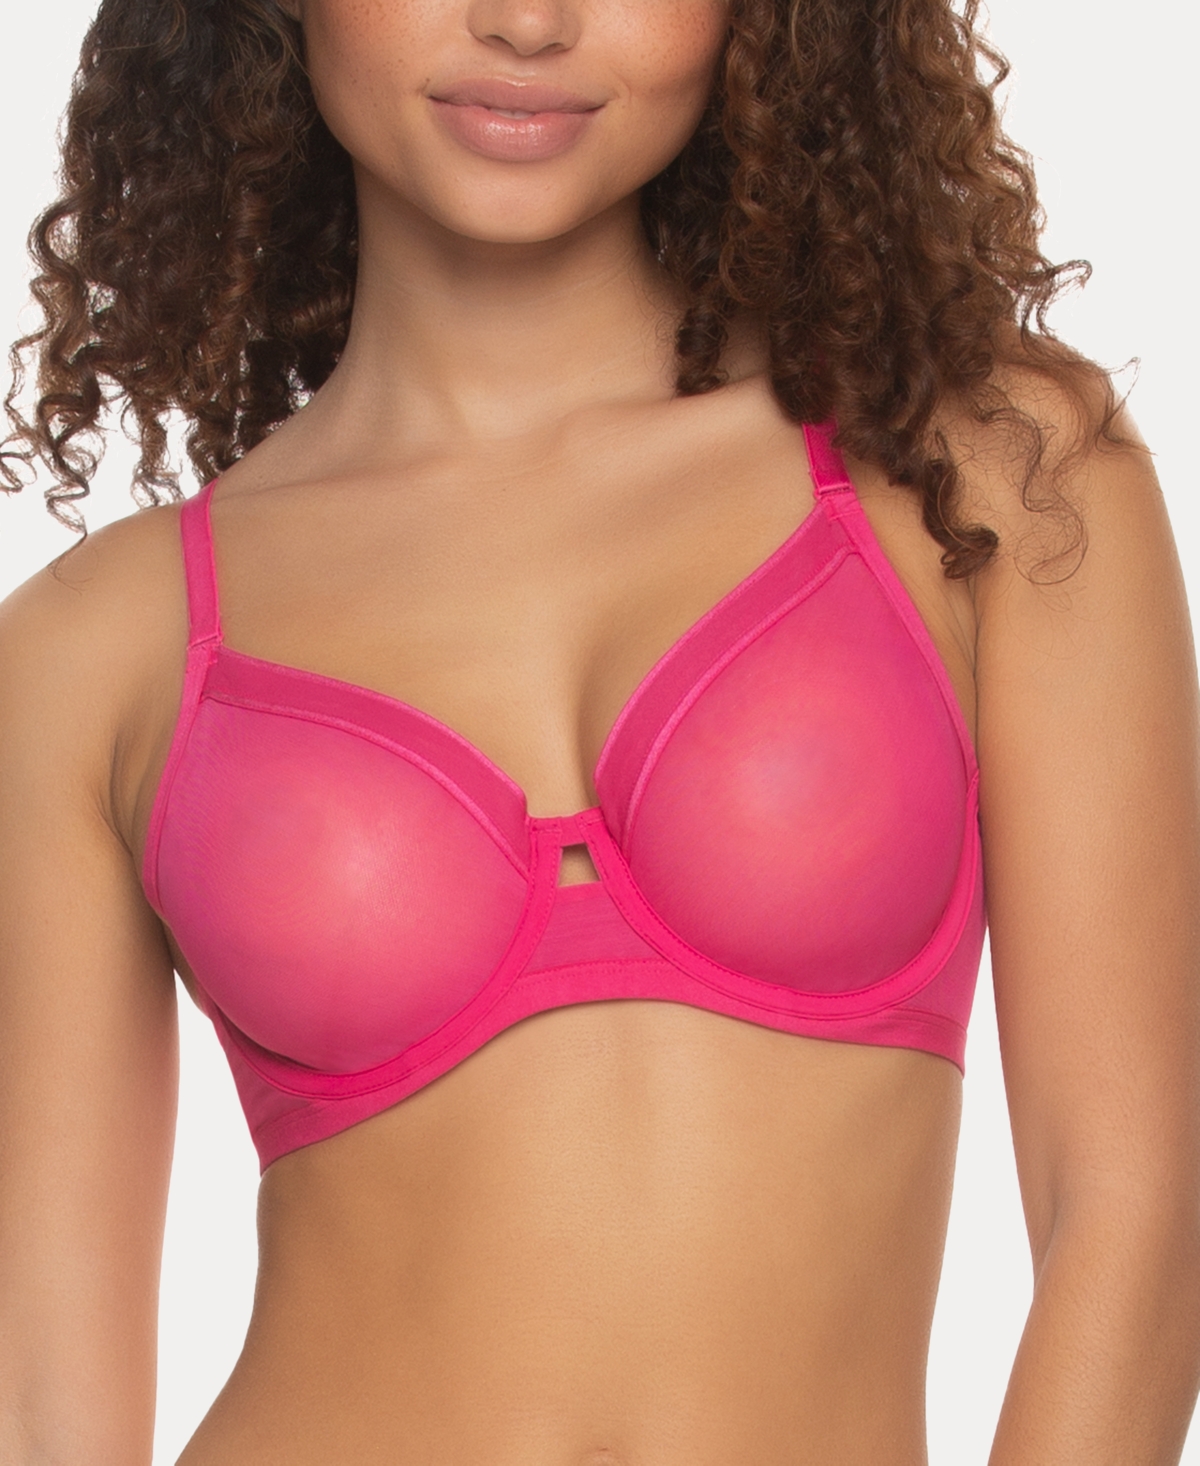 Paramour Women's Ethereal Sheer Mesh Underwire Bra, 115159 In Fuscia